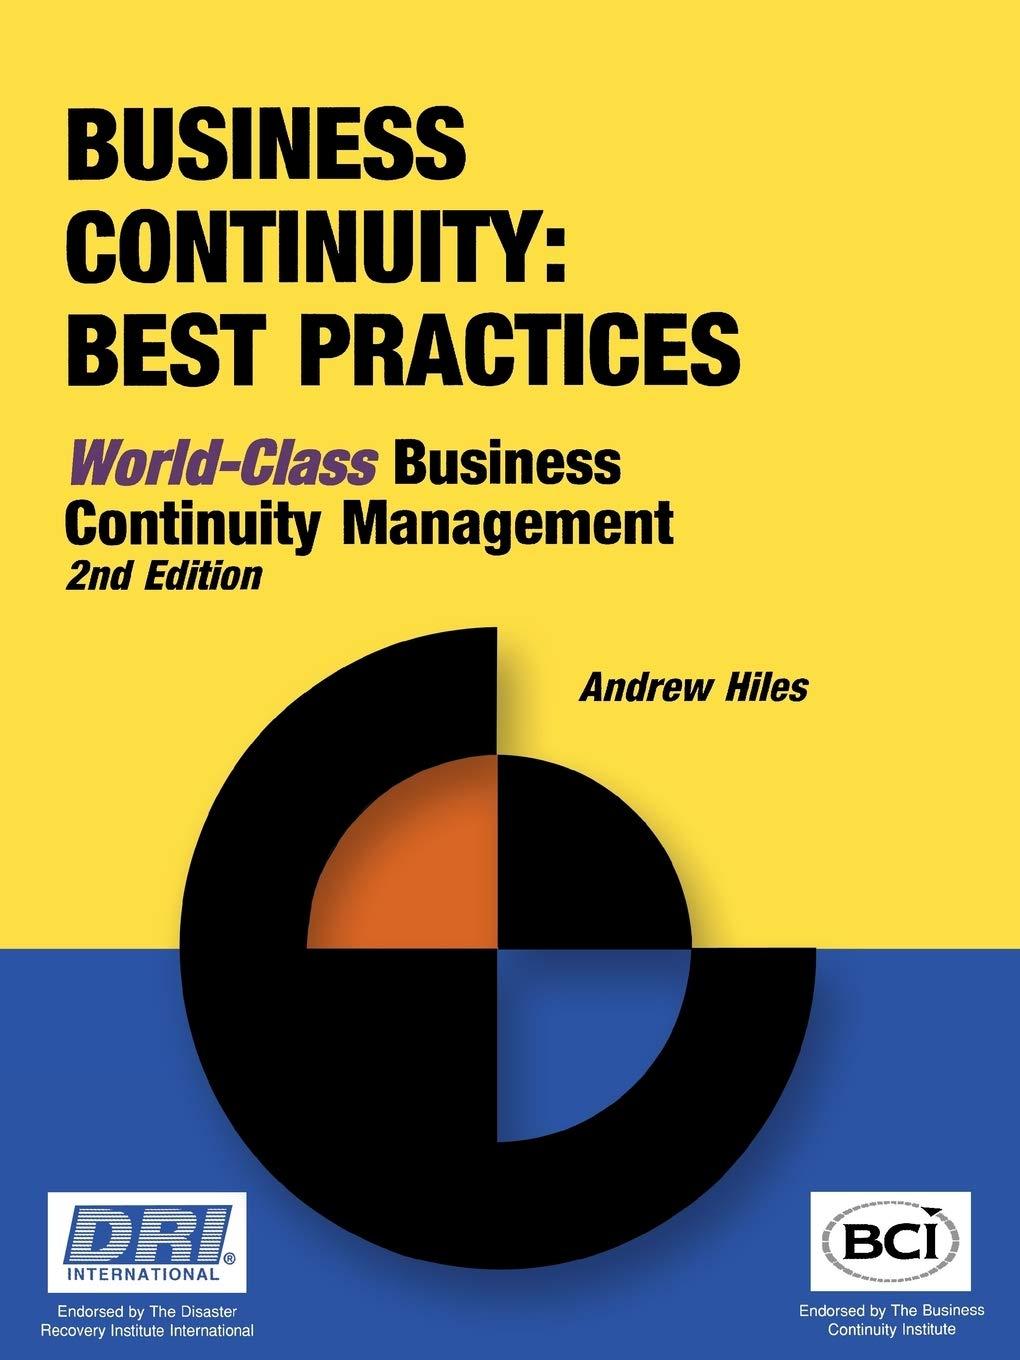 business continuity best practices 2nd edition andrew hiles 1931332223, 978-1931332224